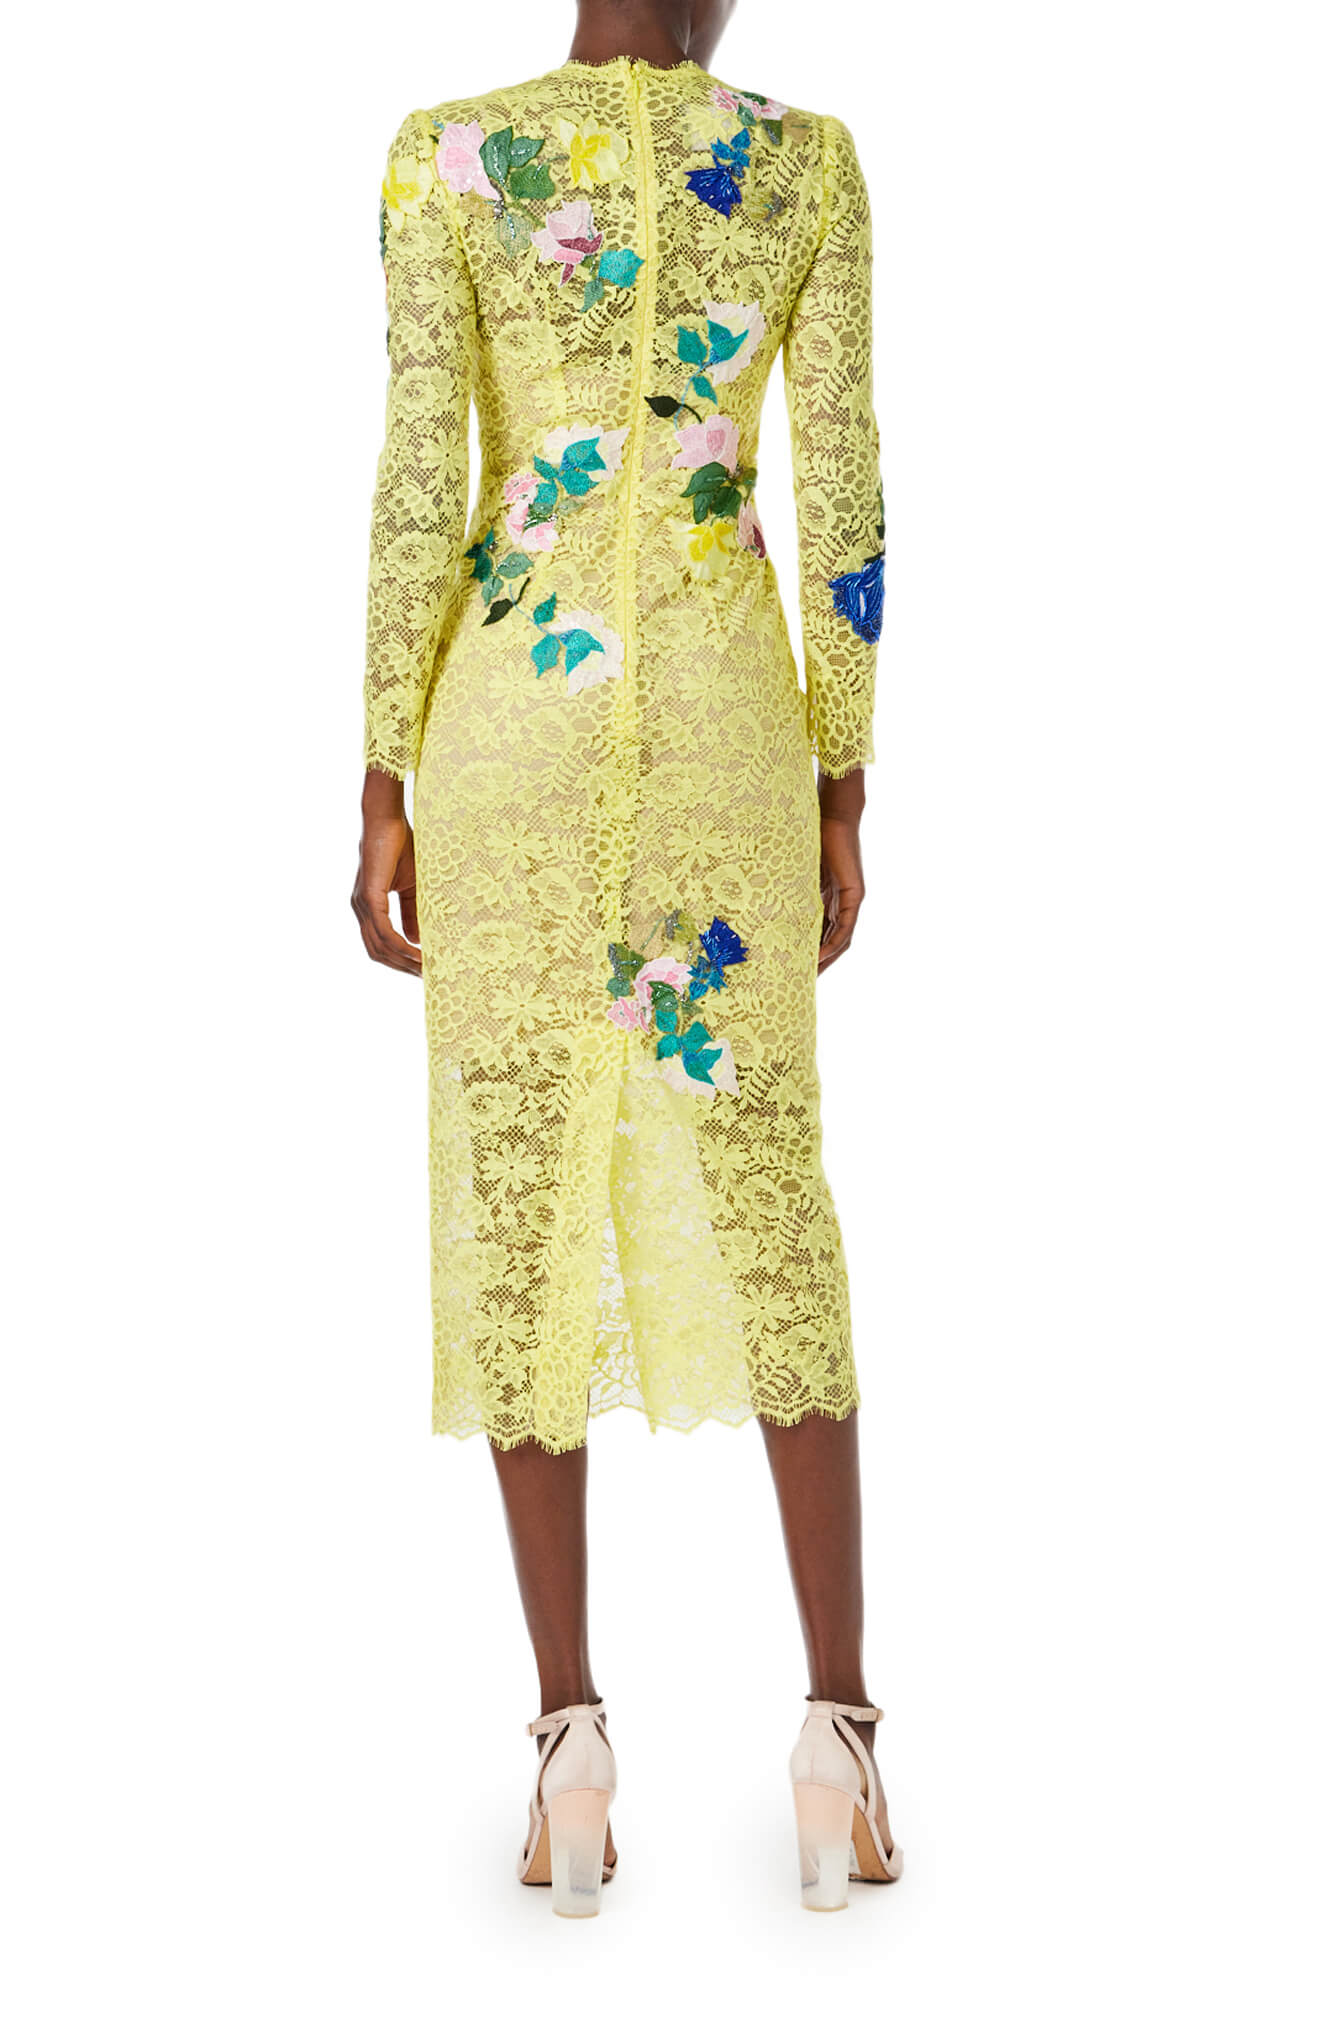 Monique Lhuillier Spring 2024 long sleeve yellow lace midi dress with floral embroidery - back.